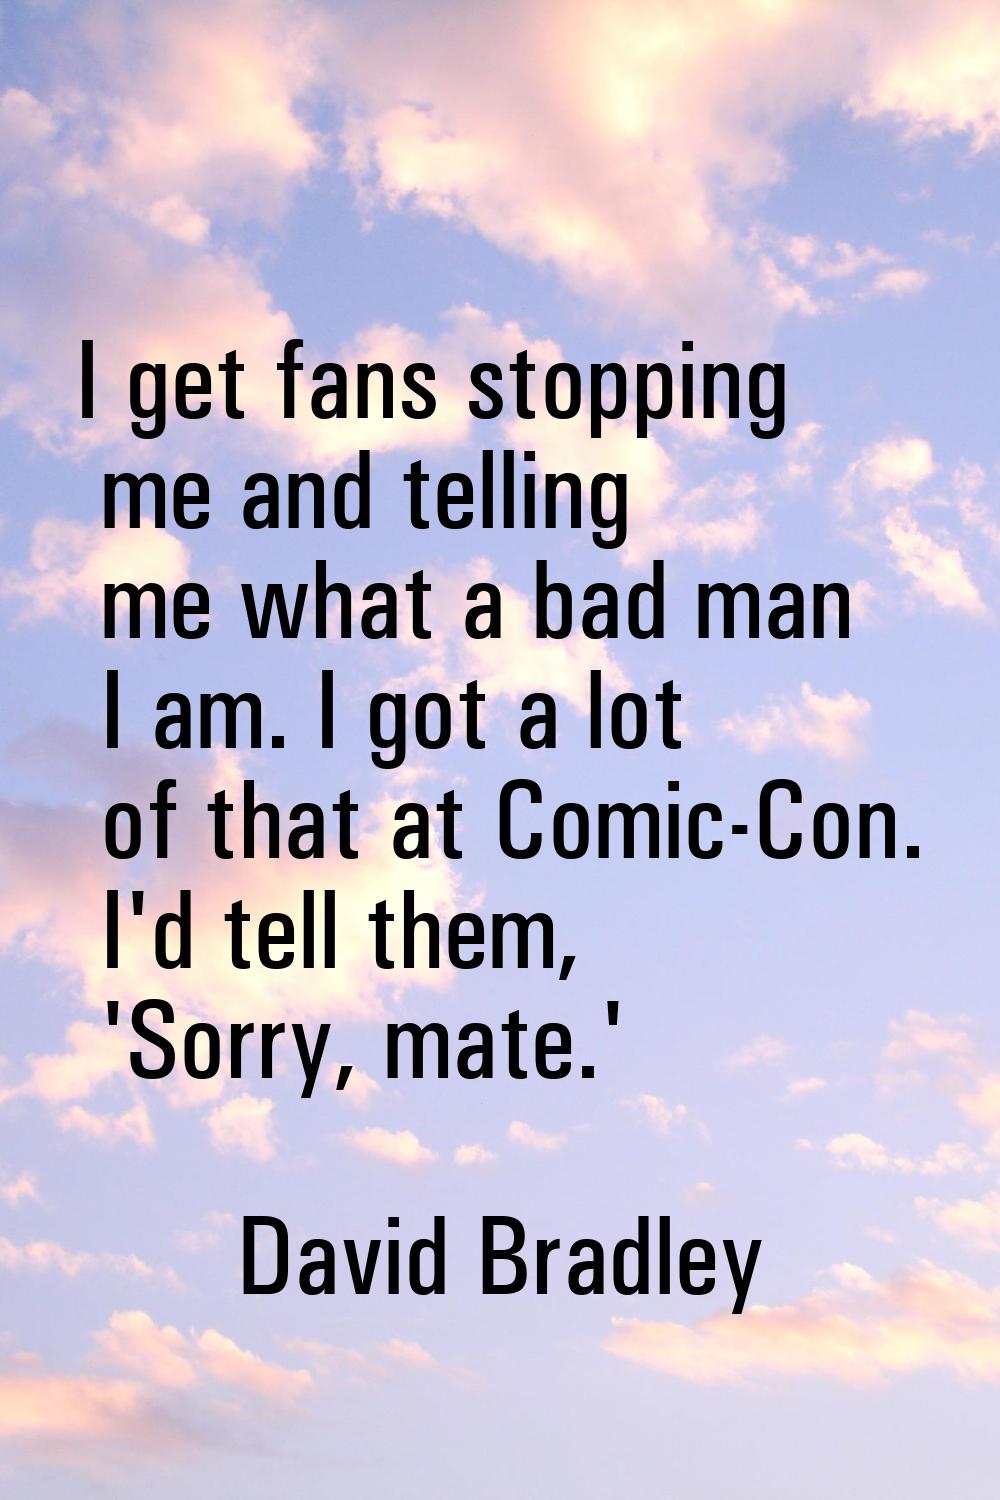 I get fans stopping me and telling me what a bad man I am. I got a lot of that at Comic-Con. I'd te